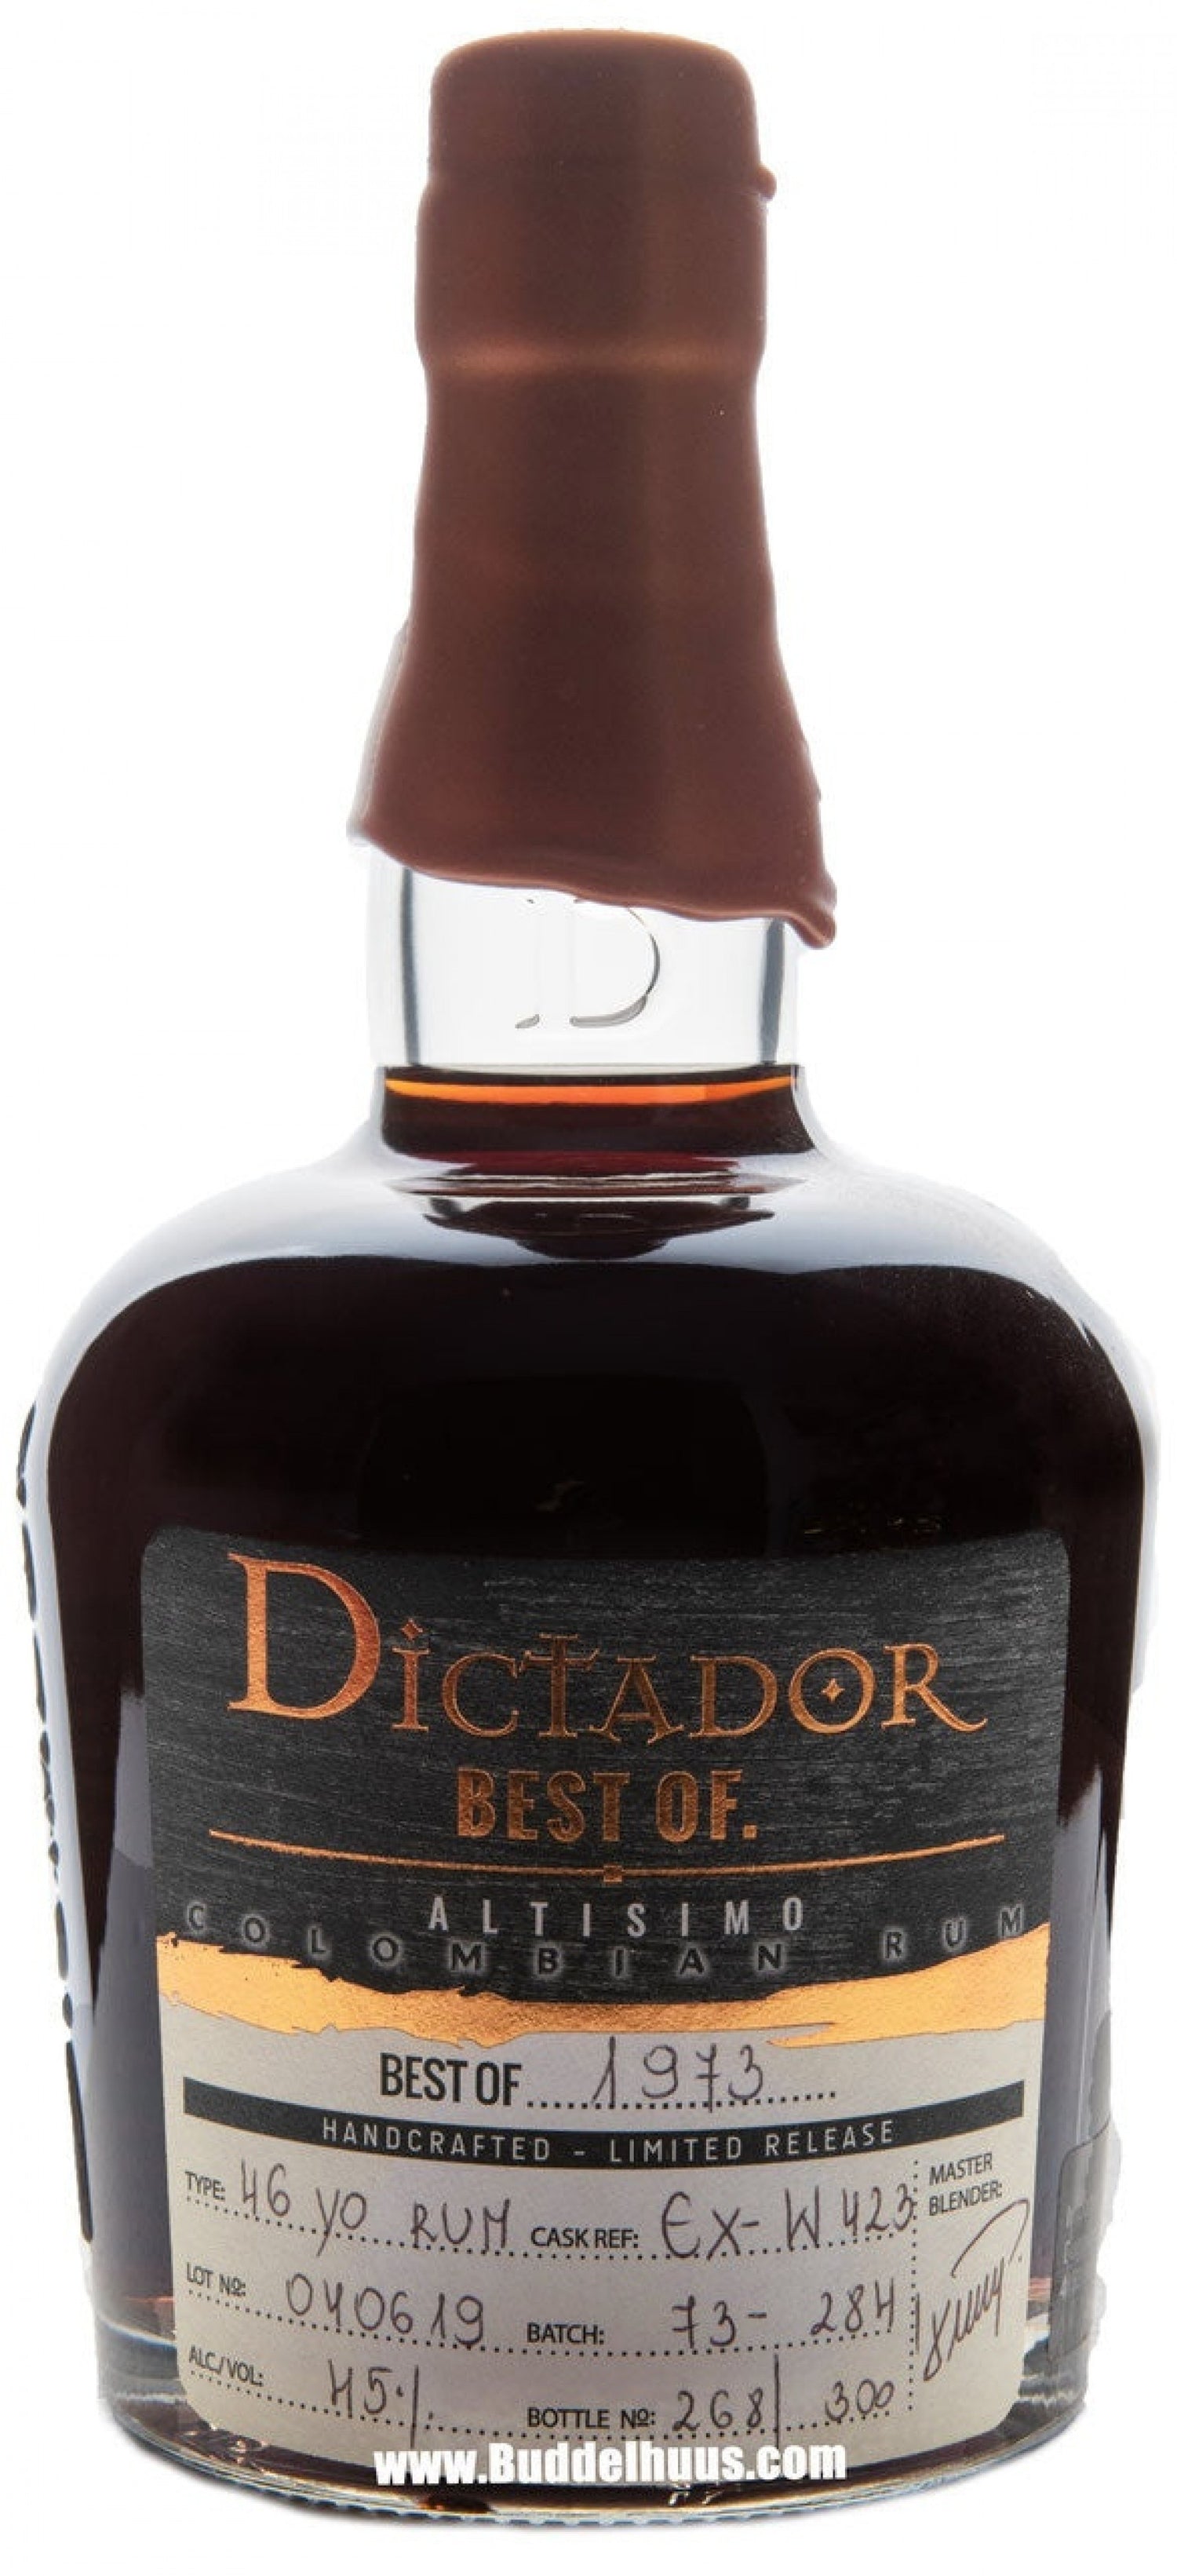 Dictador Best of Vintage 1973 Altissimo